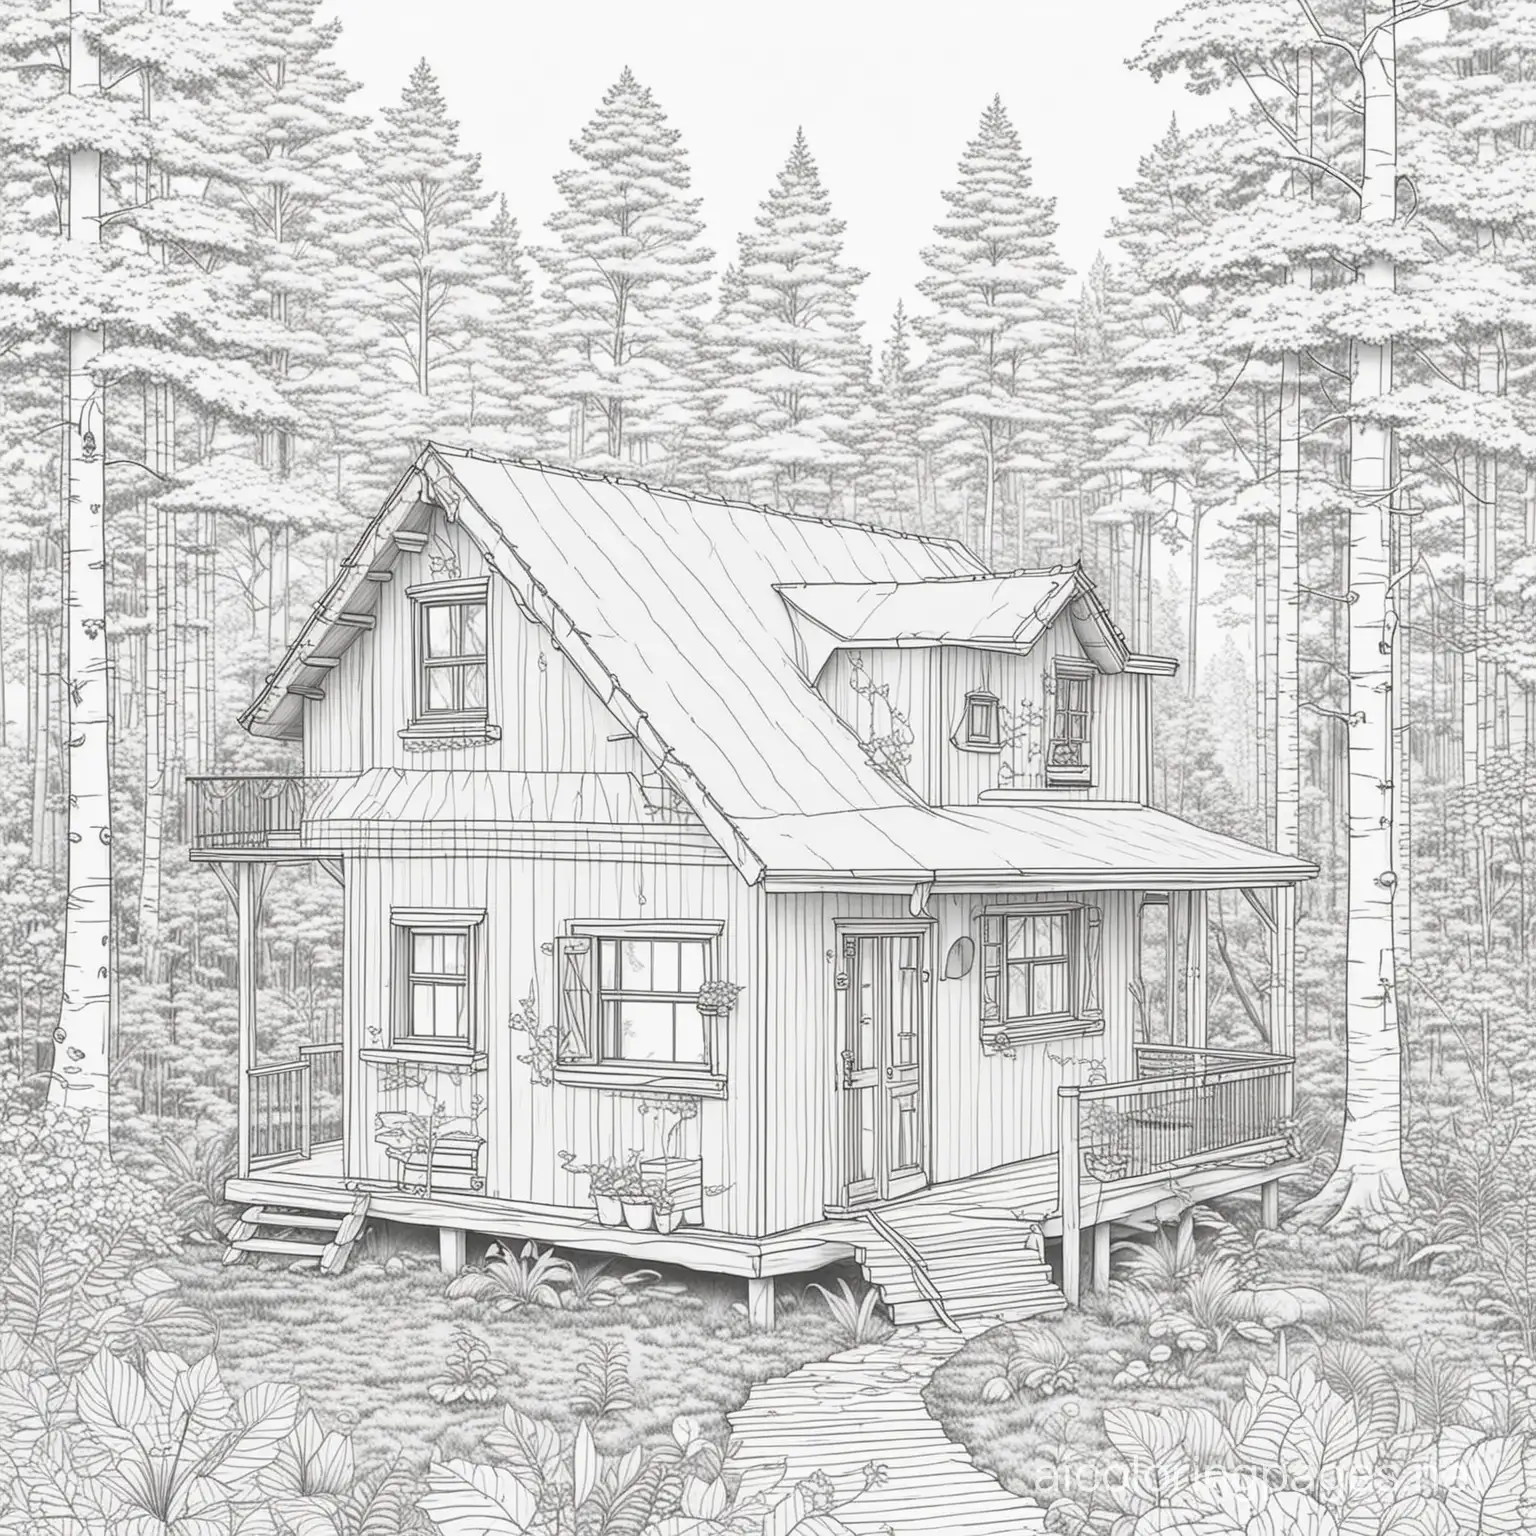 Wooden house in a forest, Coloring Page, black and white, line art, white background, Simplicity, Ample White Space. The background of the coloring page is plain white to make it easy for young children to color within the lines. The outlines of all the subjects are easy to distinguish, making it simple for kids to color without too much difficulty